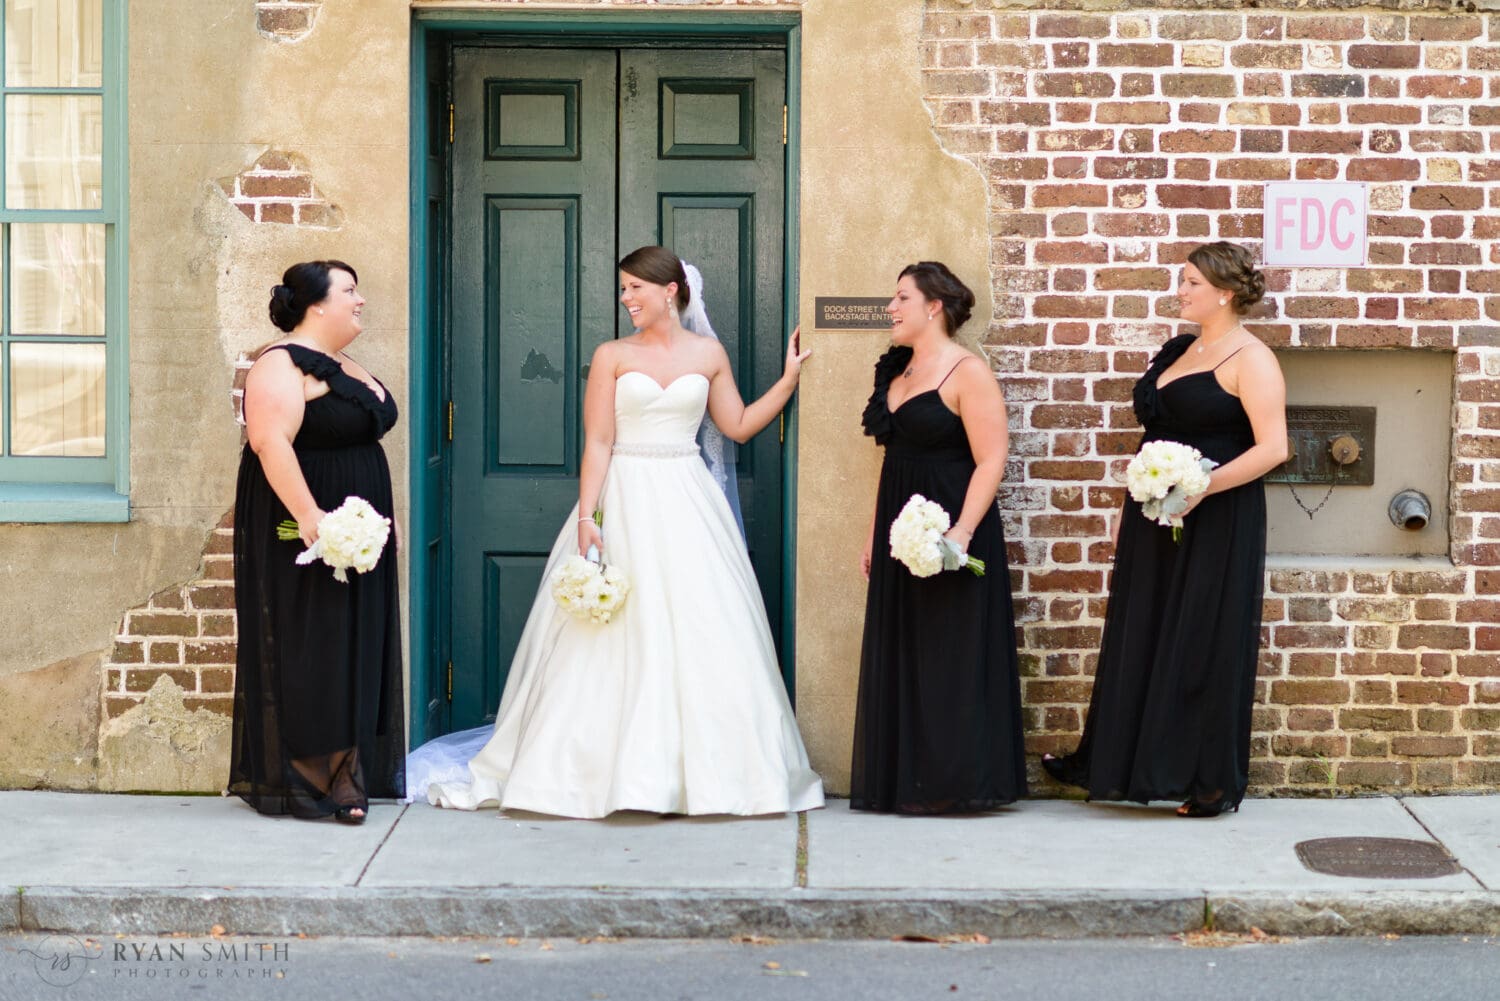 Bride laughing with bridesmaids by the brick wall - Downtown Charleston, SC